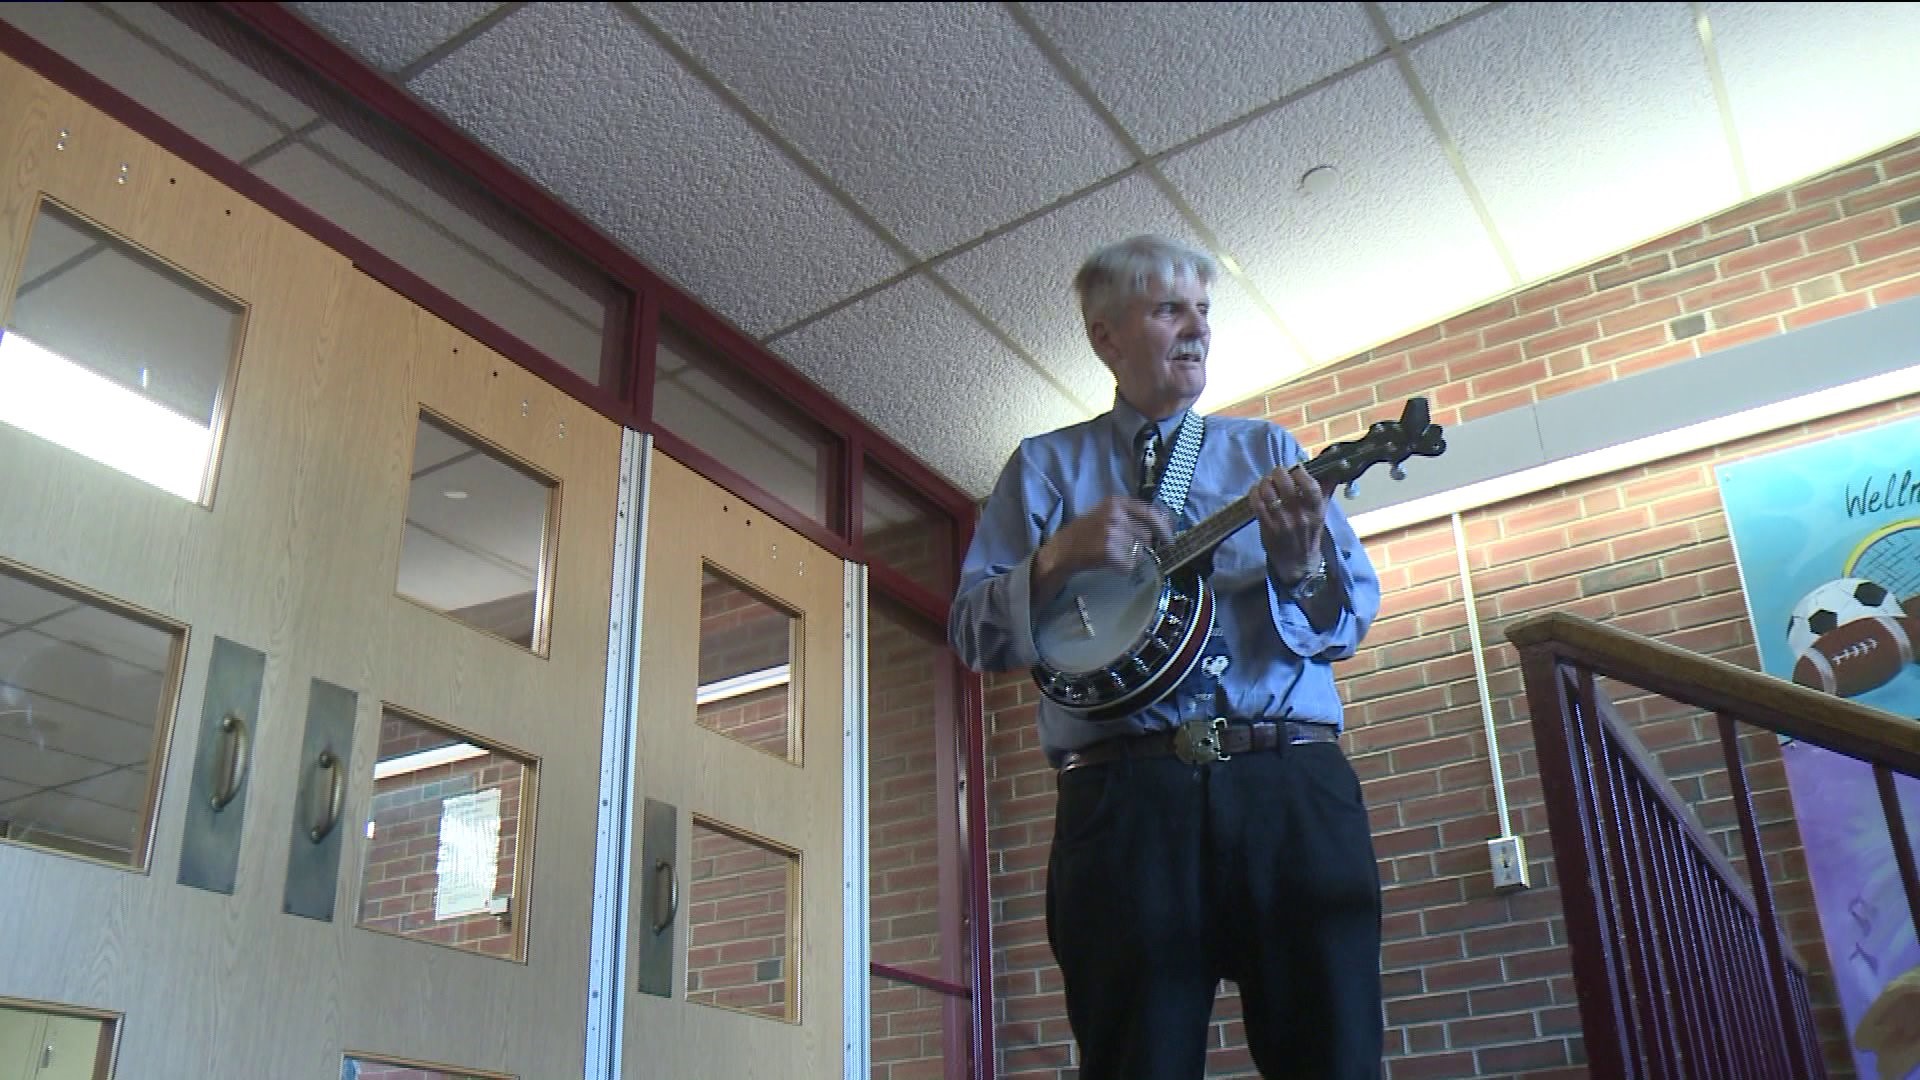 Retired teacher greets students back-to-school playing ukulele